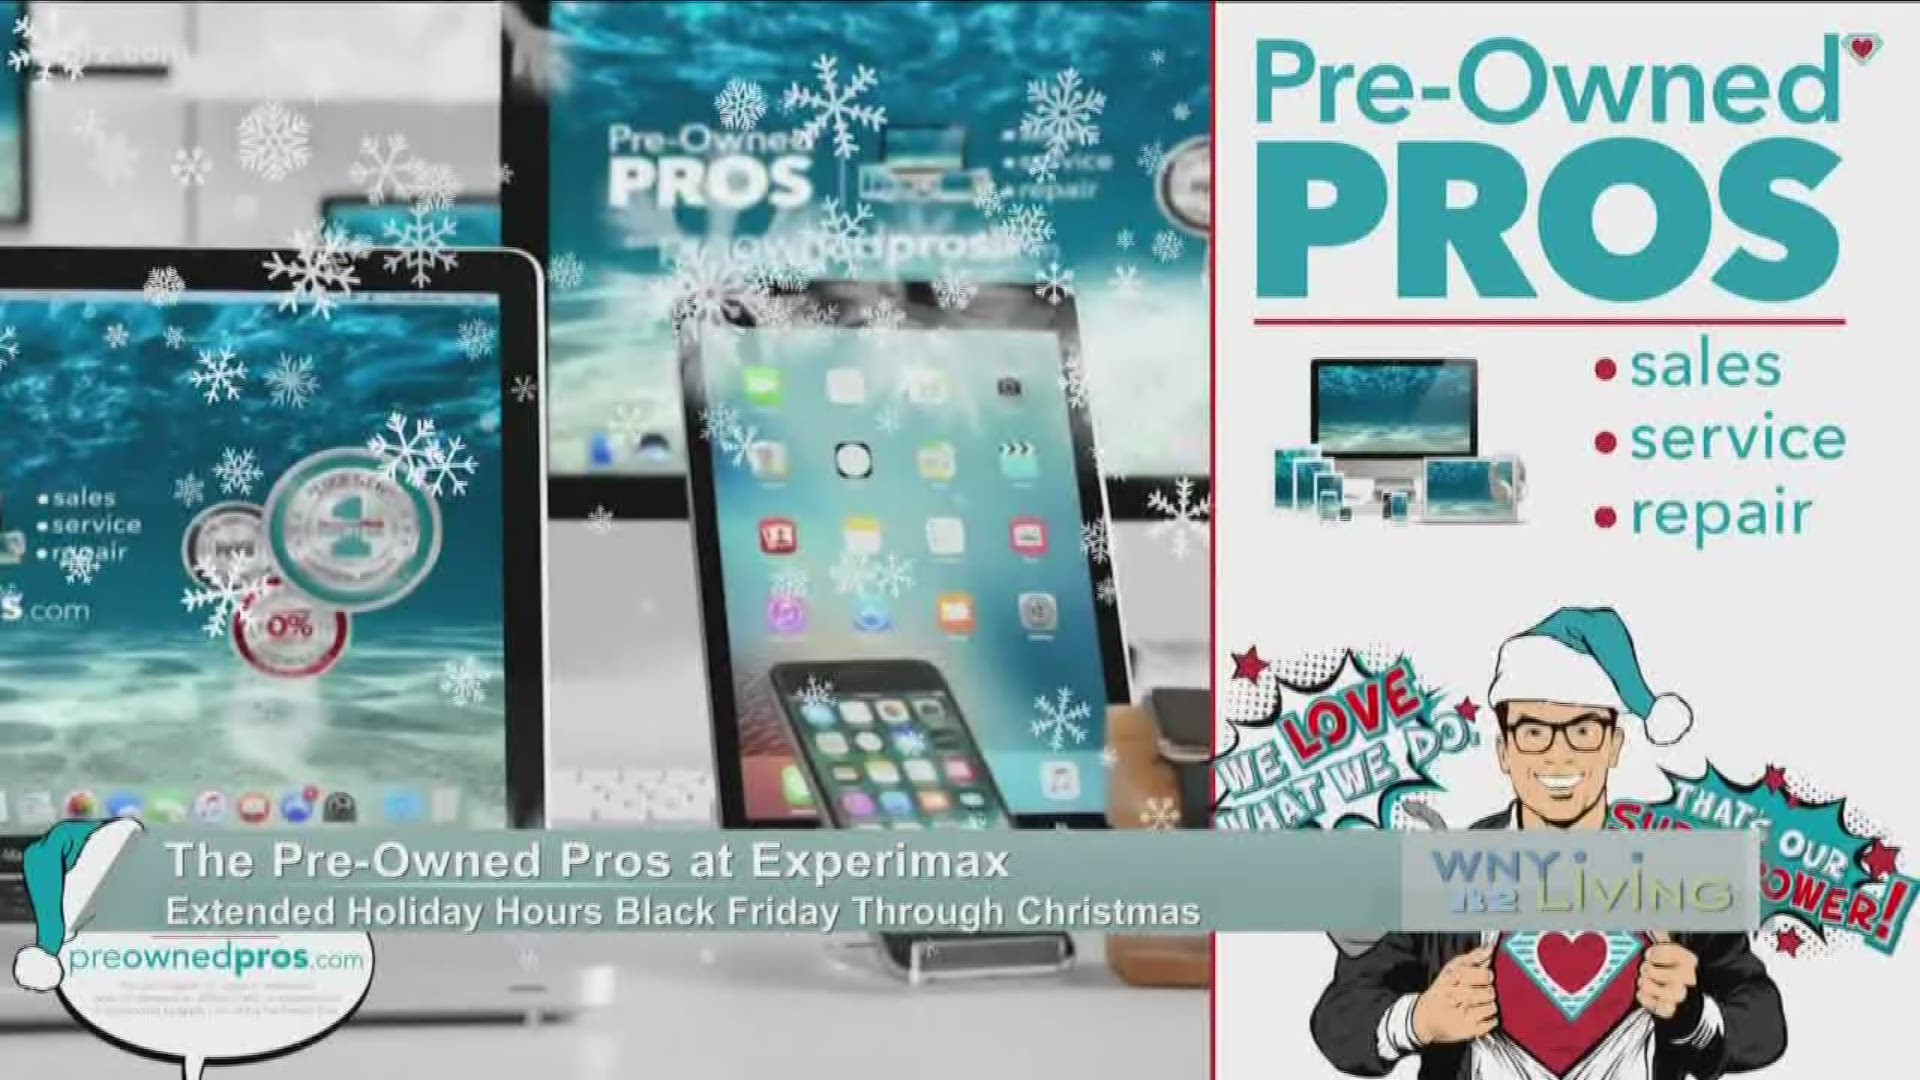 November 16 - The Pre-Owned Pros at Experimax (THIS VIDEO IS SPONSORED BY THE PRE-OWNED PROS AT EXPERIMAX)